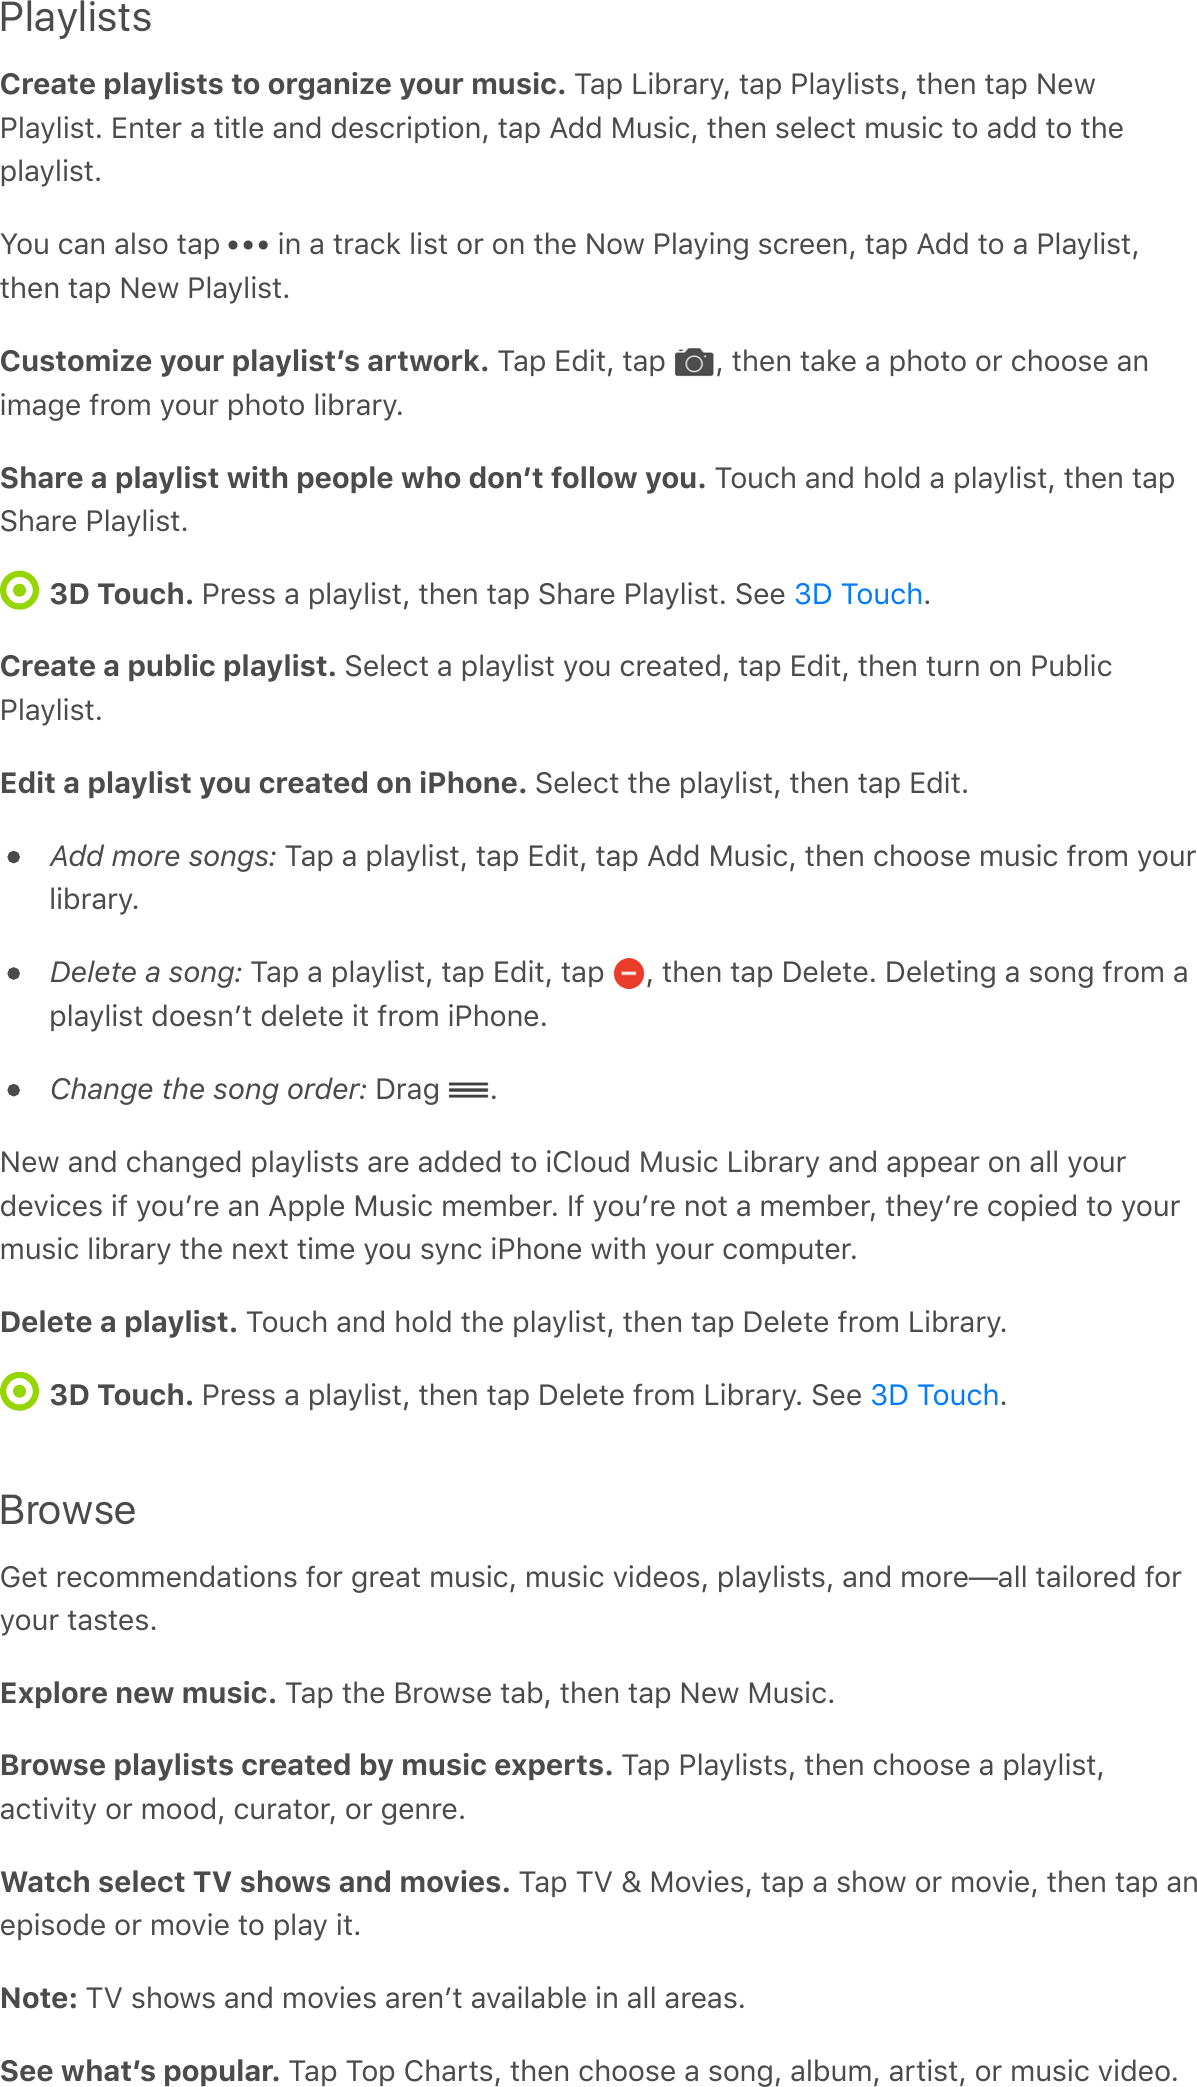 PlaylistsCreate playlists to organize your music. 2-6&amp;=(@,-,/L&amp;%-6&amp;7?-/?()%)L&amp;%1.#&amp;%-6&amp;&gt;.H7?-/?()%A&amp;V#%.,&amp;-&amp;%(%?.&amp;-#&lt;&amp;&lt;.)9,(6%(&quot;#L&amp;%-6&amp;;&lt;&lt;&amp;B0)(9L&amp;%1.#&amp;).?.9%&amp;&apos;0)(9&amp;%&quot;&amp;-&lt;&lt;&amp;%&quot;&amp;%1.6?-/?()%AN&quot;0&amp;9-#&amp;-?)&quot;&amp;%-6&amp; &amp;(#&amp;-&amp;%,-93&amp;?()%&amp;&quot;,&amp;&quot;#&amp;%1.&amp;&gt;&quot;H&amp;7?-/(#5&amp;)9,..#L&amp;%-6&amp;;&lt;&lt;&amp;%&quot;&amp;-&amp;7?-/?()%L%1.#&amp;%-6&amp;&gt;.H&amp;7?-/?()%ACustomize your playlistʼs artwork. 2-6&amp;V&lt;(%L&amp;%-6&amp; L&amp;%1.#&amp;%-3.&amp;-&amp;61&quot;%&quot;&amp;&quot;,&amp;91&quot;&quot;).&amp;-#(&apos;-5.&amp;8,&quot;&apos;&amp;/&quot;0,&amp;61&quot;%&quot;&amp;?(@,-,/AShare a playlist with people who donʼt follow you. 2&quot;091&amp;-#&lt;&amp;1&quot;?&lt;&amp;-&amp;6?-/?()%L&amp;%1.#&amp;%-6E1-,.&amp;7?-/?()%A3D Touch. 7,.))&amp;-&amp;6?-/?()%L&amp;%1.#&amp;%-6&amp;E1-,.&amp;7?-/?()%A&amp;E..&amp; ACreate a public playlist. E.?.9%&amp;-&amp;6?-/?()%&amp;/&quot;0&amp;9,.-%.&lt;L&amp;%-6&amp;V&lt;(%L&amp;%1.#&amp;%0,#&amp;&quot;#&amp;70@?(97?-/?()%AEdit a playlist you created on iPhone. E.?.9%&amp;%1.&amp;6?-/?()%L&amp;%1.#&amp;%-6&amp;V&lt;(%AAdd more songs: 2-6&amp;-&amp;6?-/?()%L&amp;%-6&amp;V&lt;(%L&amp;%-6&amp;;&lt;&lt;&amp;B0)(9L&amp;%1.#&amp;91&quot;&quot;).&amp;&apos;0)(9&amp;8,&quot;&apos;&amp;/&quot;0,?(@,-,/ADelete a song: 2-6&amp;-&amp;6?-/?()%L&amp;%-6&amp;V&lt;(%L&amp;%-6&amp; L&amp;%1.#&amp;%-6&amp;!.?.%.A&amp;!.?.%(#5&amp;-&amp;)&quot;#5&amp;8,&quot;&apos;&amp;-6?-/?()%&amp;&lt;&quot;.)#$%&amp;&lt;.?.%.&amp;(%&amp;8,&quot;&apos;&amp;(71&quot;#.AChange the song order: !,-5&amp; A&gt;.H&amp;-#&lt;&amp;91-#5.&lt;&amp;6?-/?()%)&amp;-,.&amp;-&lt;&lt;.&lt;&amp;%&quot;&amp;(O?&quot;0&lt;&amp;B0)(9&amp;=(@,-,/&amp;-#&lt;&amp;-66.-,&amp;&quot;#&amp;-??&amp;/&quot;0,&lt;.:(9.)&amp;(8&amp;/&quot;0$,.&amp;-#&amp;;66?.&amp;B0)(9&amp;&apos;.&apos;@.,A&amp;Q8&amp;/&quot;0$,.&amp;#&quot;%&amp;-&amp;&apos;.&apos;@.,L&amp;%1./$,.&amp;9&quot;6(.&lt;&amp;%&quot;&amp;/&quot;0,&apos;0)(9&amp;?(@,-,/&amp;%1.&amp;#.`%&amp;%(&apos;.&amp;/&quot;0&amp;)/#9&amp;(71&quot;#.&amp;H(%1&amp;/&quot;0,&amp;9&quot;&apos;60%.,ADelete a playlist. 2&quot;091&amp;-#&lt;&amp;1&quot;?&lt;&amp;%1.&amp;6?-/?()%L&amp;%1.#&amp;%-6&amp;!.?.%.&amp;8,&quot;&apos;&amp;=(@,-,/A3D Touch. 7,.))&amp;-&amp;6?-/?()%L&amp;%1.#&amp;%-6&amp;!.?.%.&amp;8,&quot;&apos;&amp;=(@,-,/A&amp;E..&amp; ABrowseG.%&amp;,.9&quot;&apos;&apos;.#&lt;-%(&quot;#)&amp;8&quot;,&amp;5,.-%&amp;&apos;0)(9L&amp;&apos;0)(9&amp;:(&lt;.&quot;)L&amp;6?-/?()%)L&amp;-#&lt;&amp;&apos;&quot;,.e-??&amp;%-(?&quot;,.&lt;&amp;8&quot;,/&quot;0,&amp;%-)%.)AExplore new music. 2-6&amp;%1.&amp;K,&quot;H).&amp;%-@L&amp;%1.#&amp;%-6&amp;&gt;.H&amp;B0)(9ABrowse playlists created by music experts. 2-6&amp;7?-/?()%)L&amp;%1.#&amp;91&quot;&quot;).&amp;-&amp;6?-/?()%L-9%(:(%/&amp;&quot;,&amp;&apos;&quot;&quot;&lt;L&amp;90,-%&quot;,L&amp;&quot;,&amp;5.#,.AWatch select TV shows and movies. 2-6&amp;2S&amp;i&amp;B&quot;:(.)L&amp;%-6&amp;-&amp;)1&quot;H&amp;&quot;,&amp;&apos;&quot;:(.L&amp;%1.#&amp;%-6&amp;-#.6()&quot;&lt;.&amp;&quot;,&amp;&apos;&quot;:(.&amp;%&quot;&amp;6?-/&amp;(%ANote: 2S&amp;)1&quot;H)&amp;-#&lt;&amp;&apos;&quot;:(.)&amp;-,.#$%&amp;-:-(?-@?.&amp;(#&amp;-??&amp;-,.-)ASee whatʼs popular. 2-6&amp;2&quot;6&amp;O1-,%)L&amp;%1.#&amp;91&quot;&quot;).&amp;-&amp;)&quot;#5L&amp;-?@0&apos;L&amp;-,%()%L&amp;&quot;,&amp;&apos;0)(9&amp;:(&lt;.&quot;A]!&amp;2&quot;091]!&amp;2&quot;091